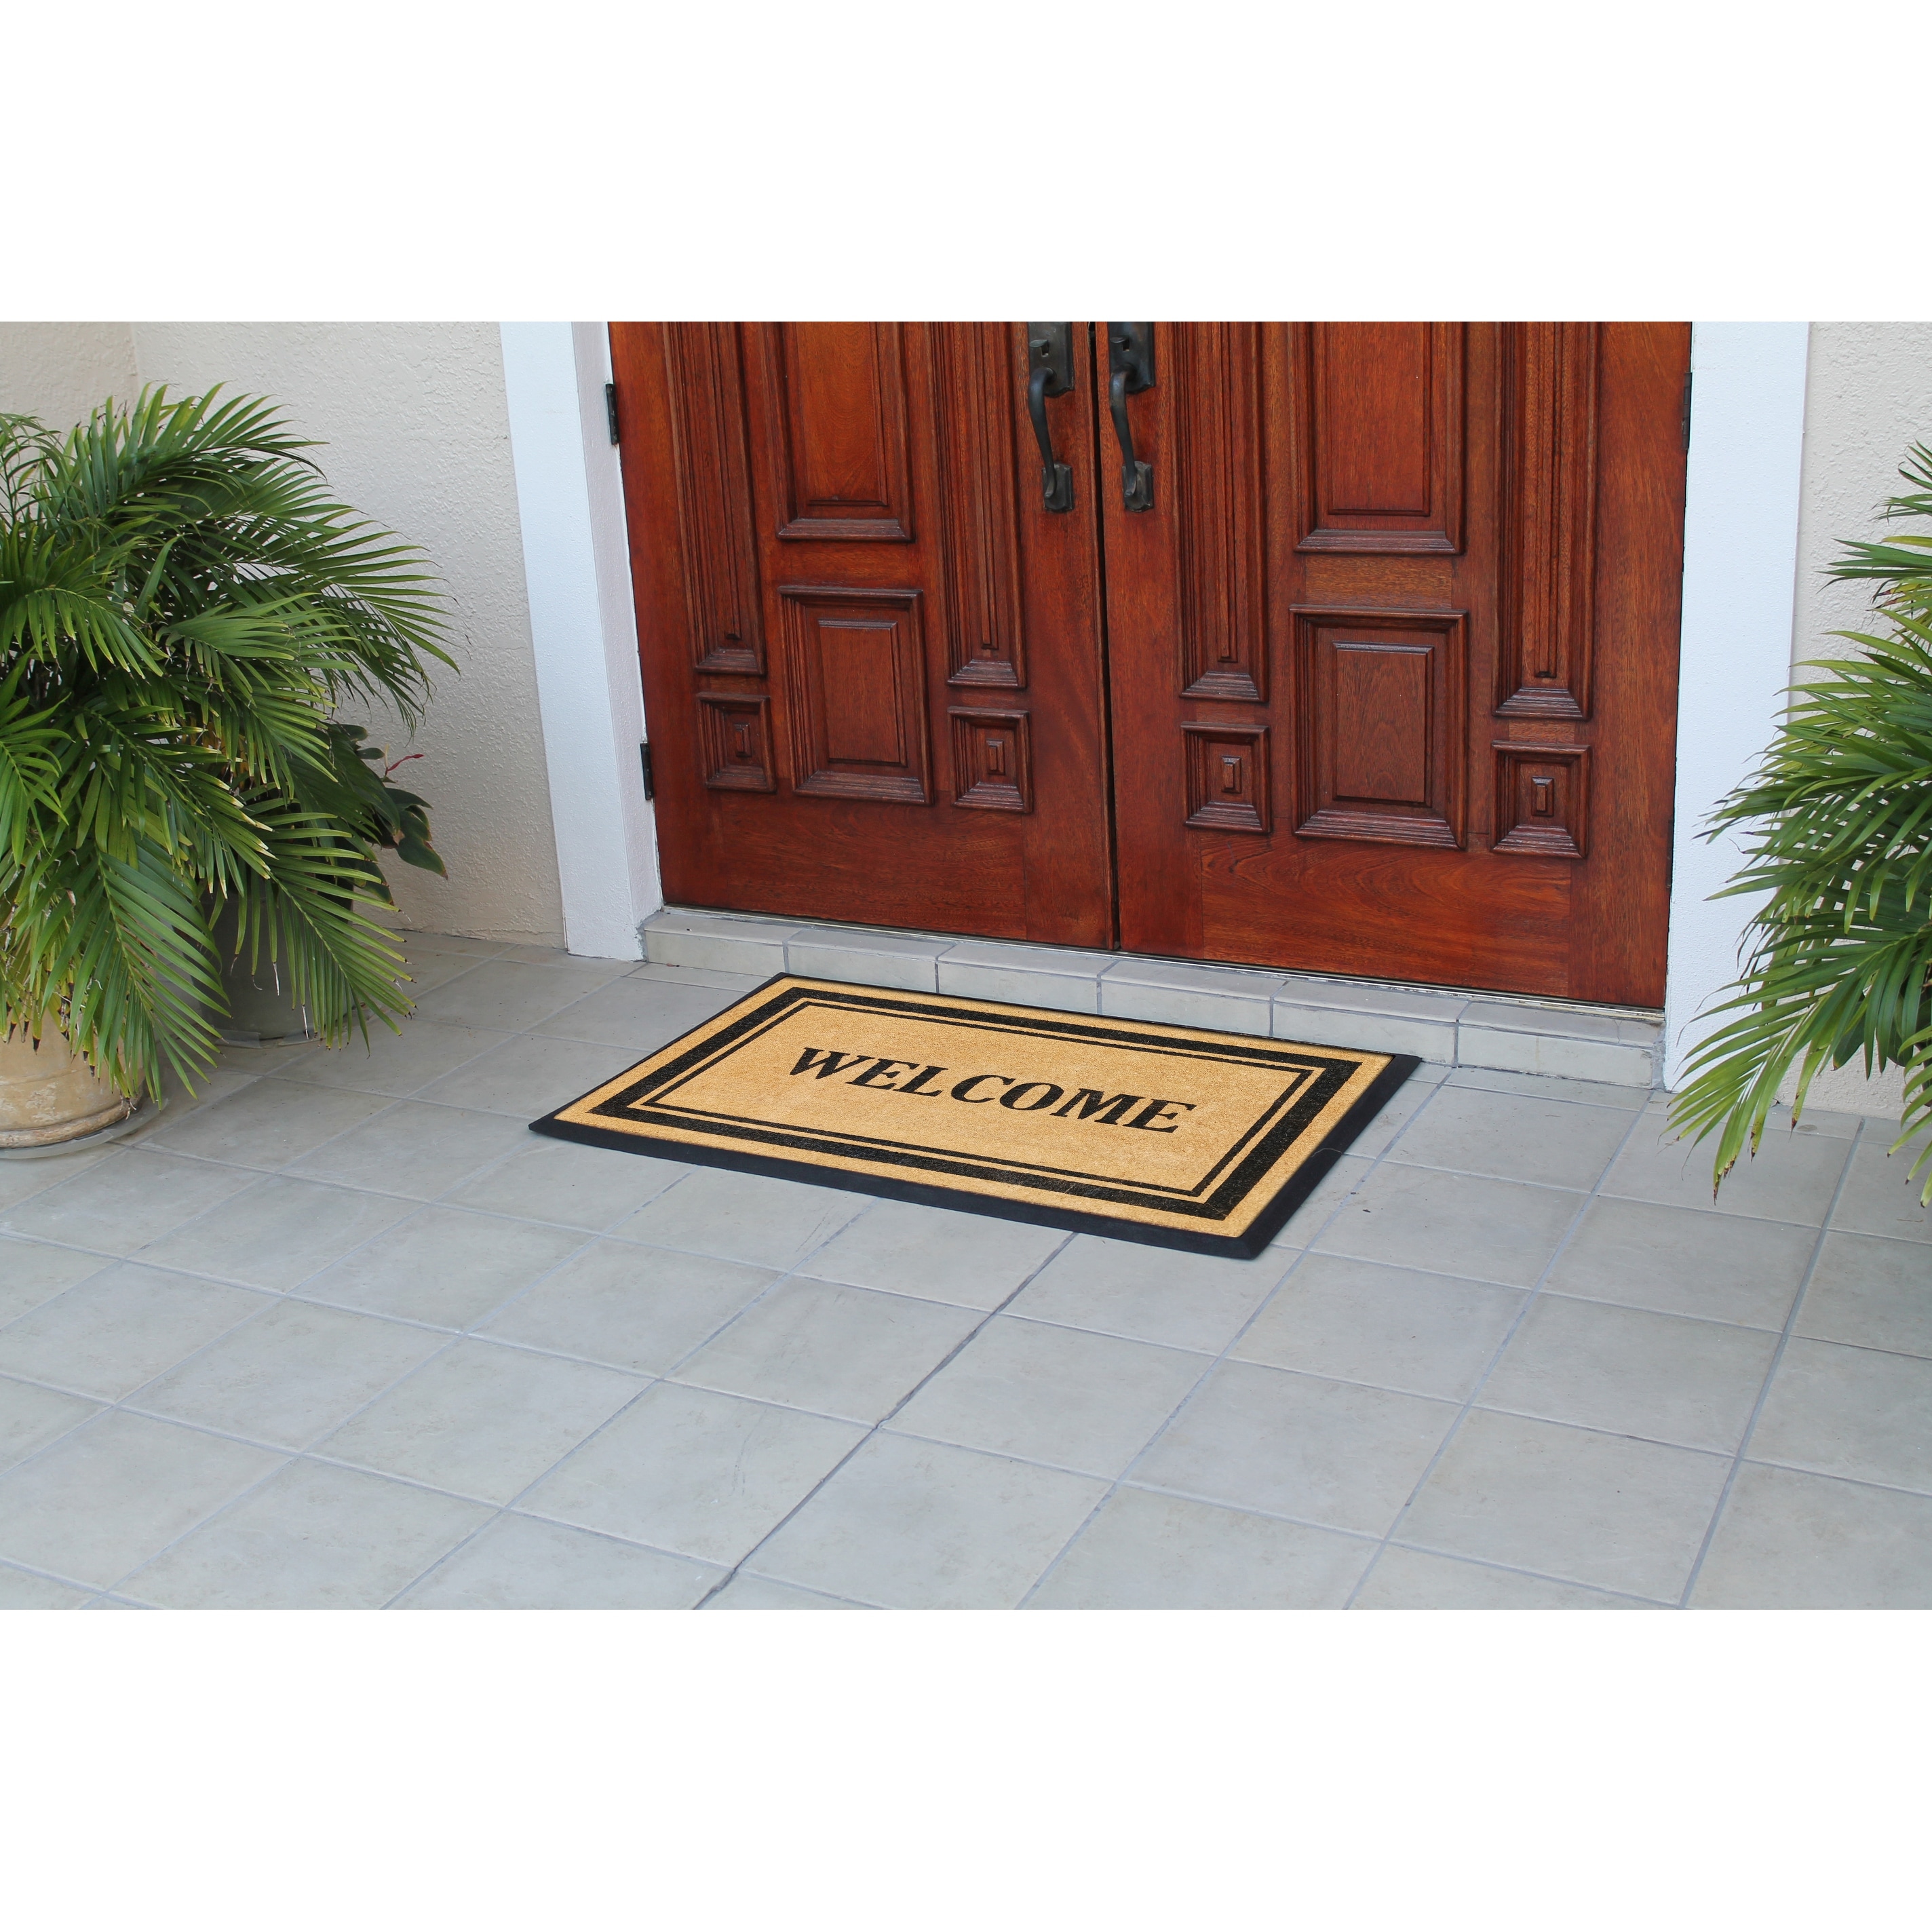 https://ak1.ostkcdn.com/images/products/is/images/direct/dca41333f3ffbdae1bbc6b9ca52df734e9632032/A1HC-Natural-Coir-%26-Rubber-Door-Mat%2C-30x48%2C-Thick-Durable-Doormats-for-Outdoor-Entrance.jpg